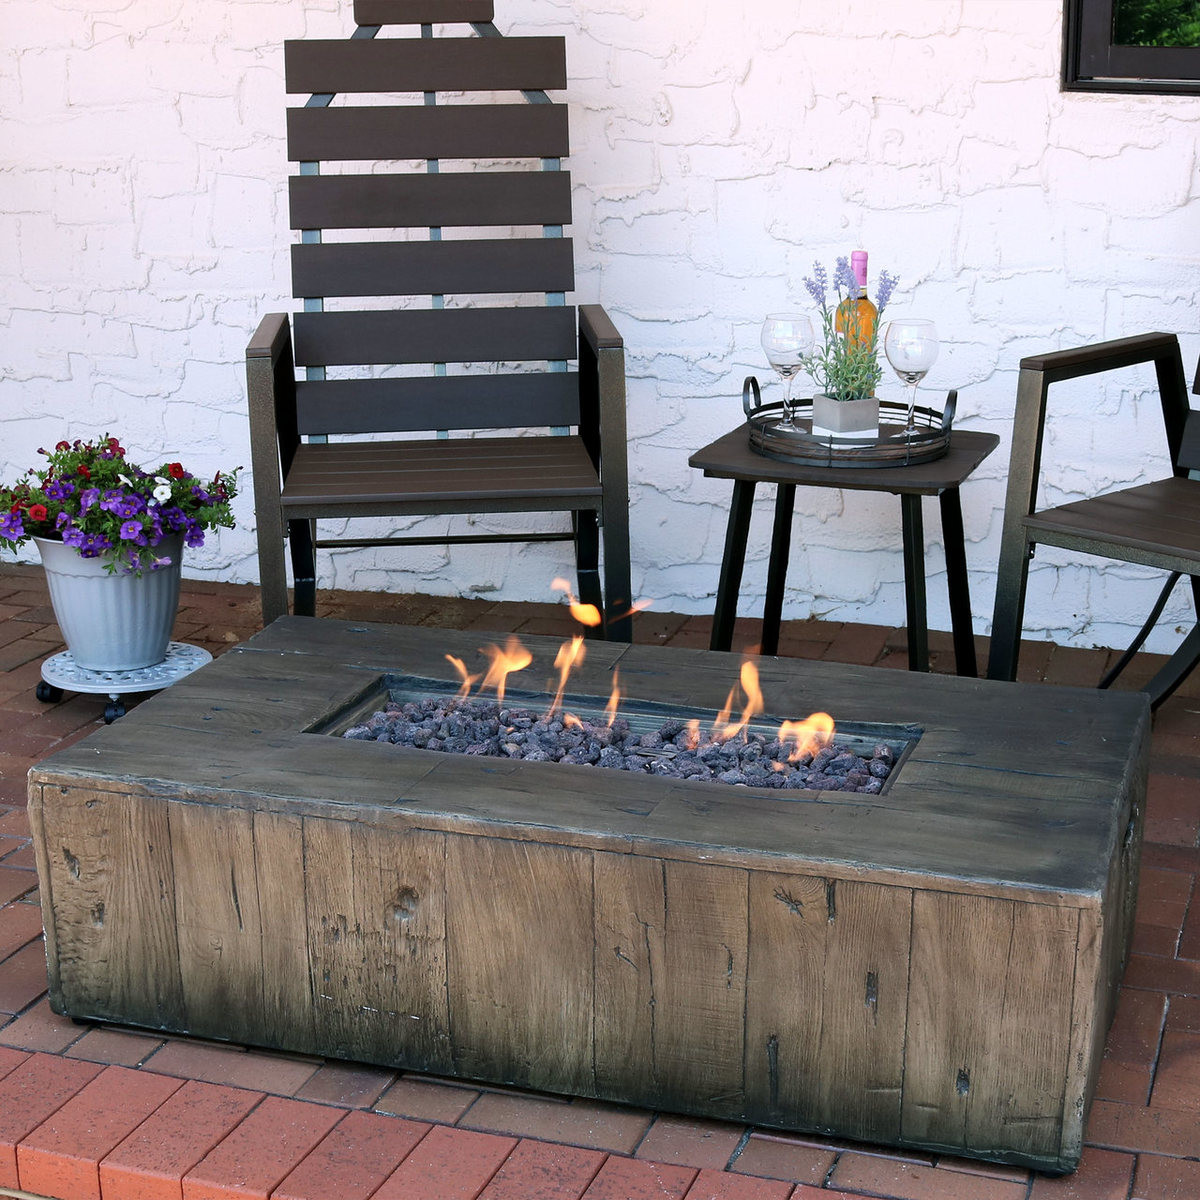 Propane Fire Pit Coffee Table
 Sunnydaze 48 Inch Rustic Faux Wood Outdoor Propane Gas